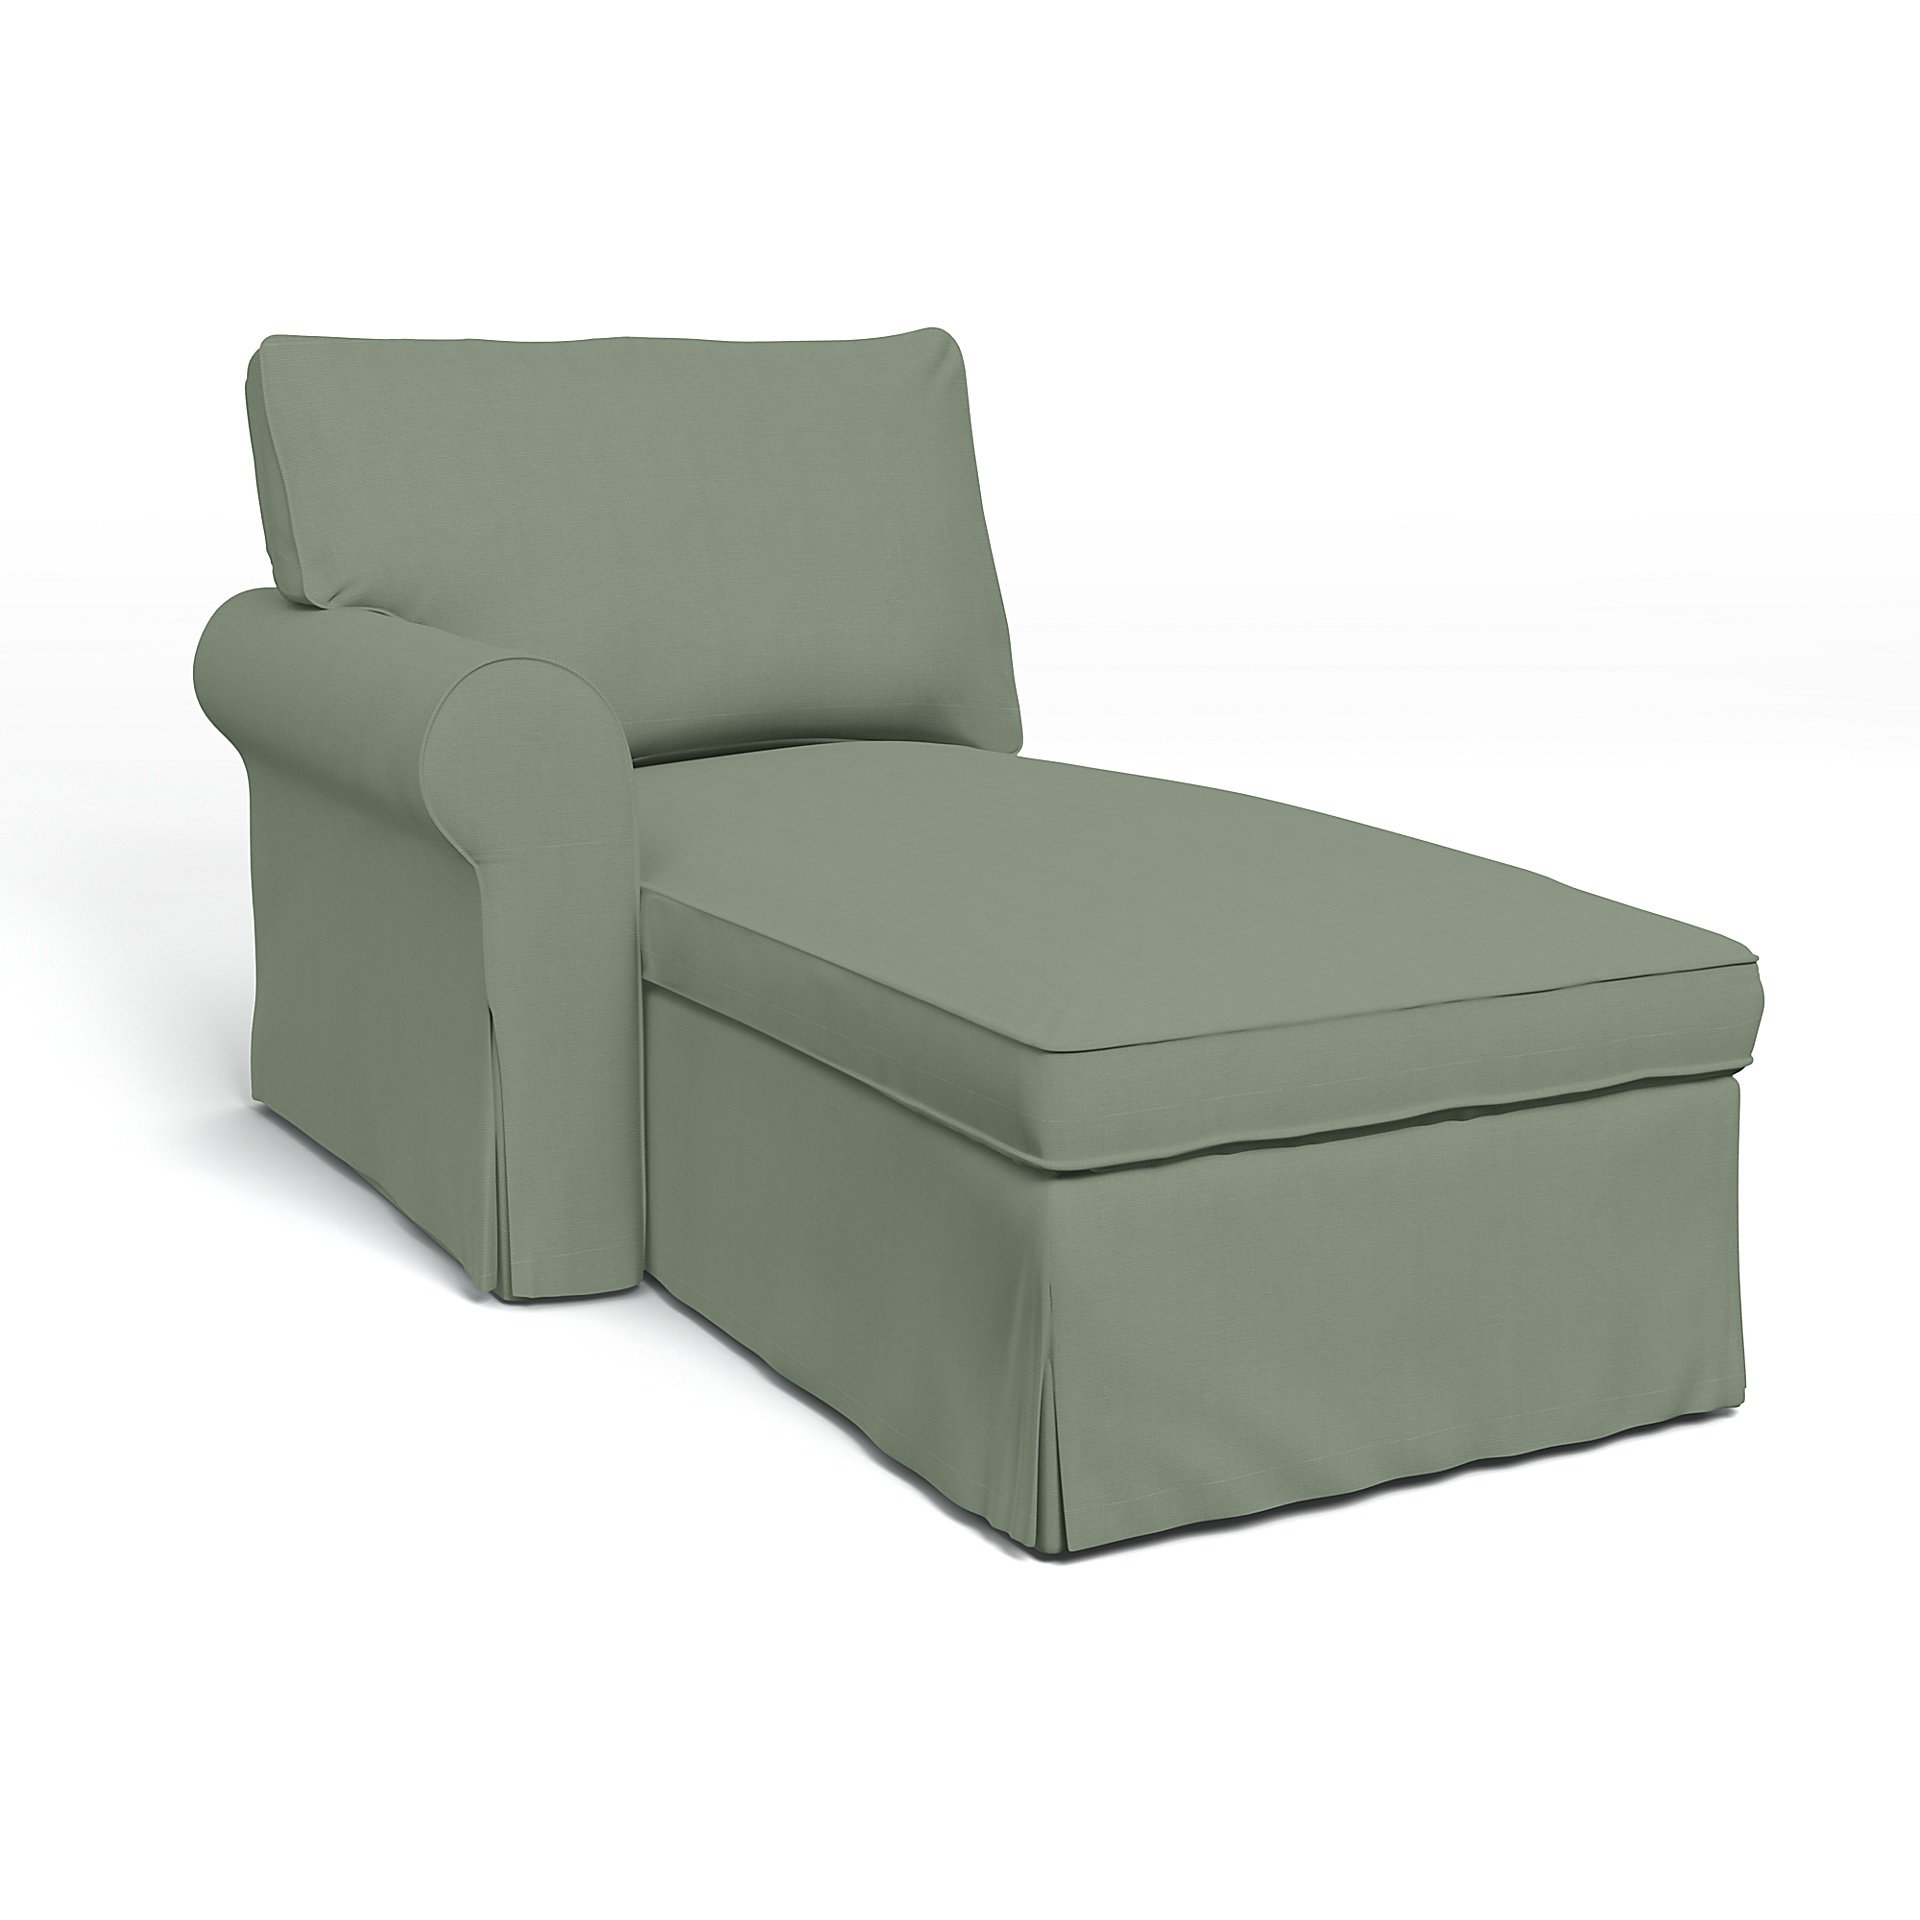 IKEA - Ektorp Chaise with Left Armrest Cover, Seagrass, Cotton - Bemz